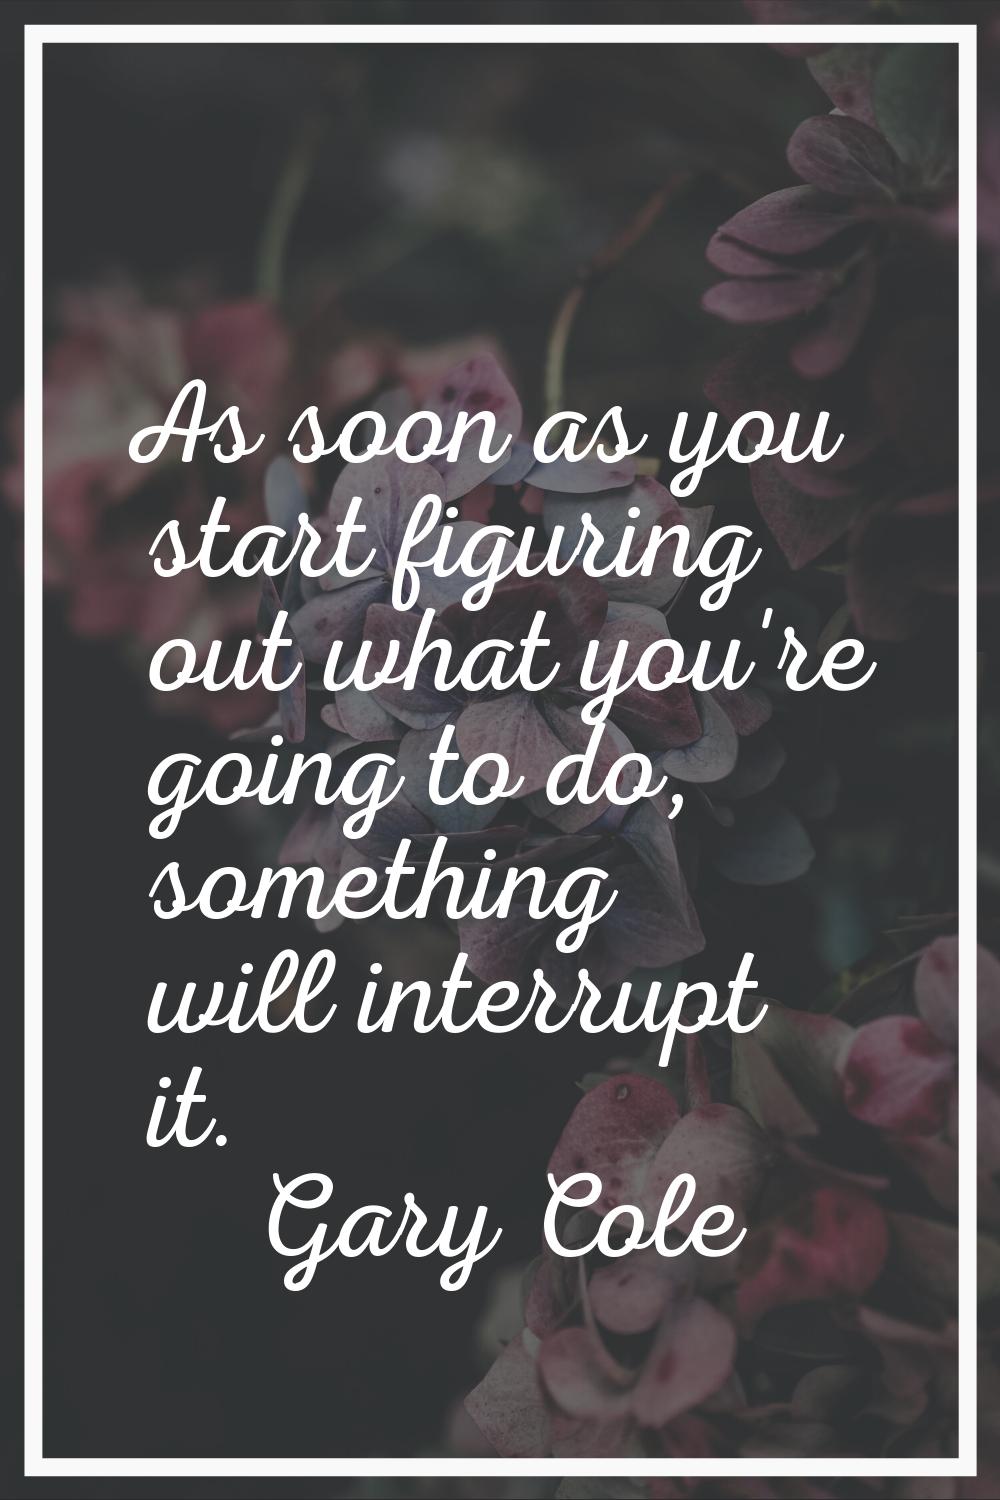 As soon as you start figuring out what you're going to do, something will interrupt it.